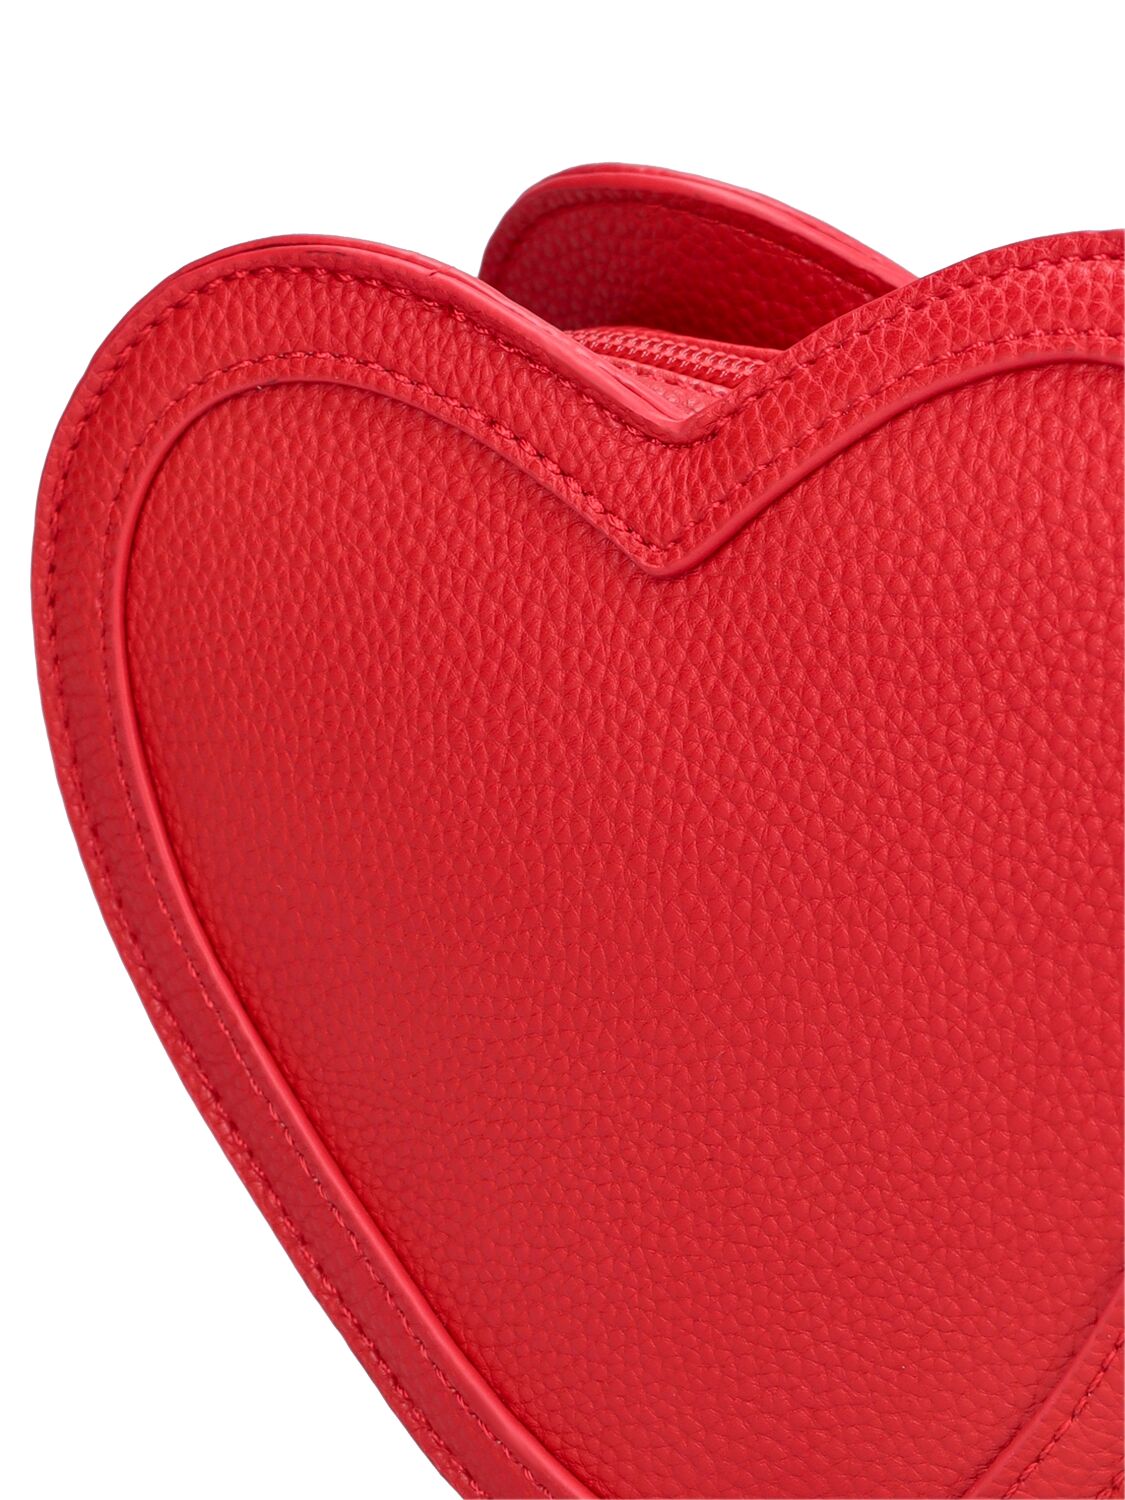 Shop Molo Heart Faux Leather Shoulder Bag In Red